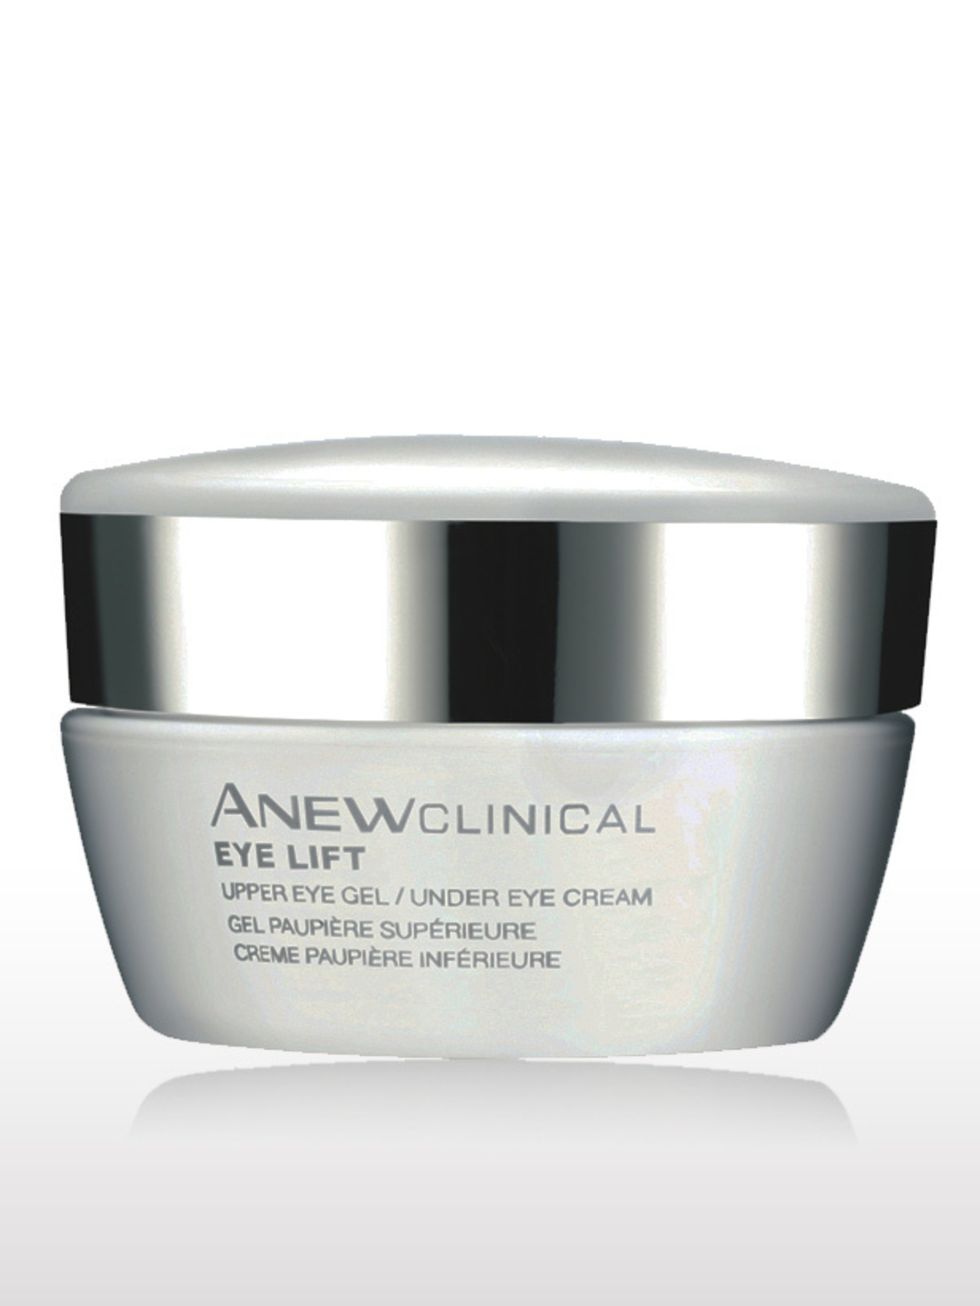 <p> </p><p>Anew Clinical Eye Lift, £20, by <a href="http://avonshop.co.uk/product/skincare/eye-creams/anew-clinical-crows-feet-corrector.html">Avon</a></p><p> </p><p>Im quite taken with this eye product  it makes so much sense to package a cream for th